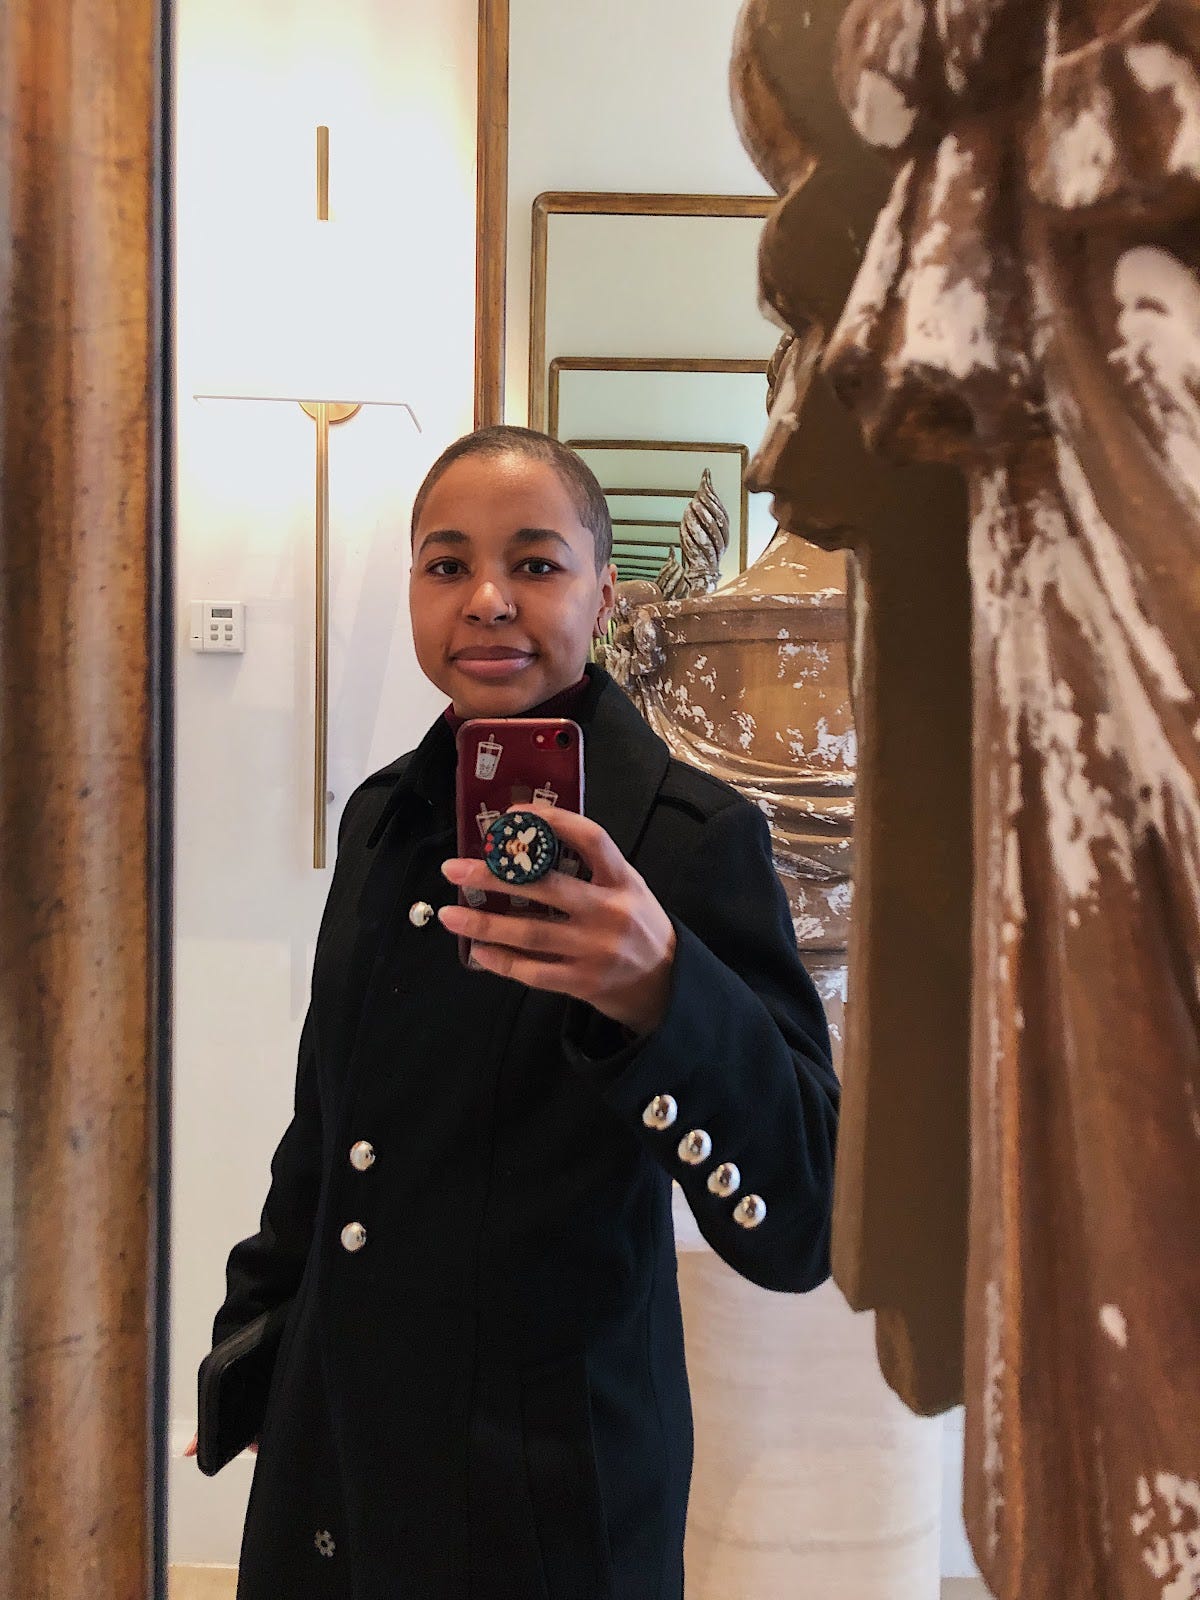 Girl taking a selfie in a large mirror with a huge statue of a woman in front of it. The girl has a shaved head, and is in a nice black pea coat.